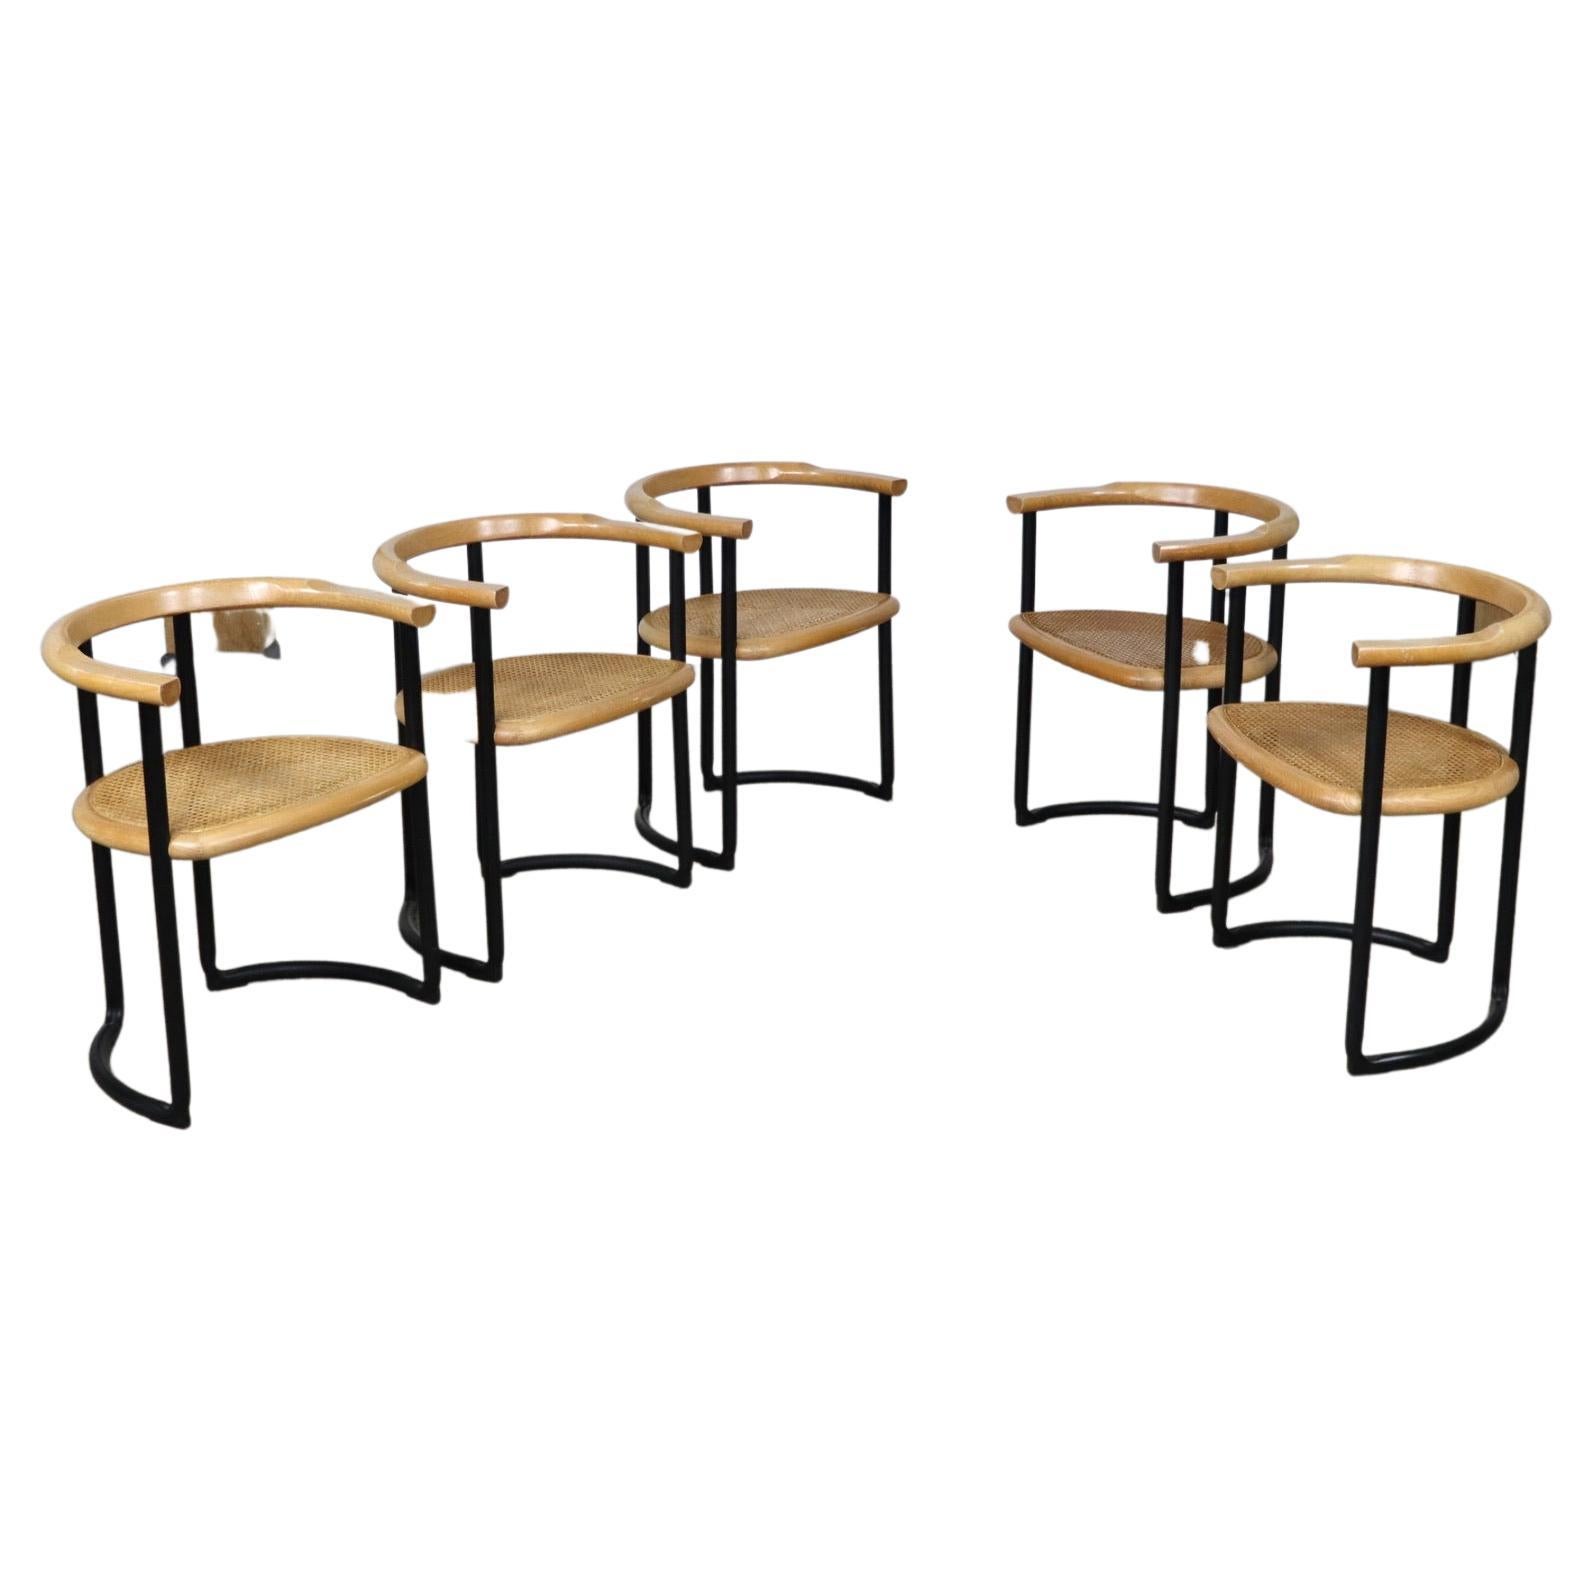 Set of 5 Tito Agnoli Achillea Dining Chairs for Ycami, Italy, 1970s For Sale